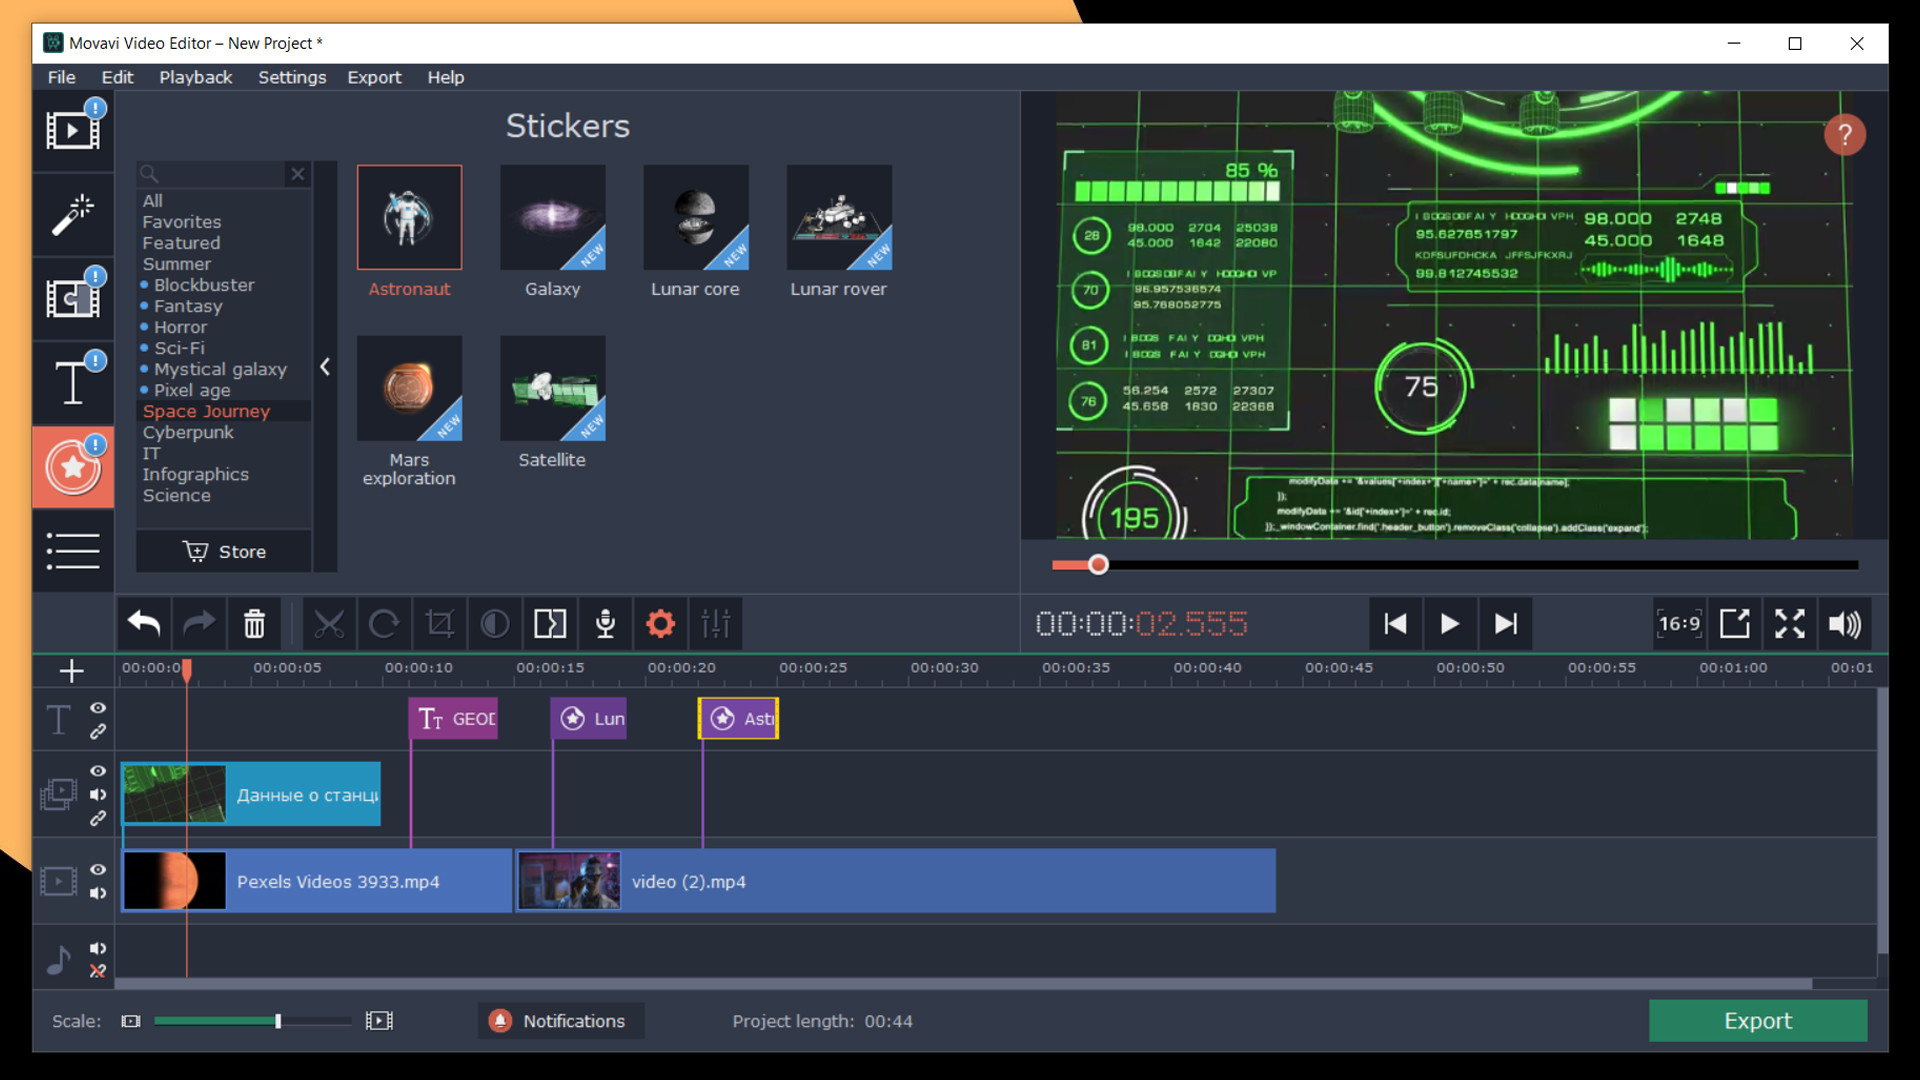 [$ 1.18] Movavi Video Editor Plus 2020 Effects - Space Journey Pack DLC Steam CD Key